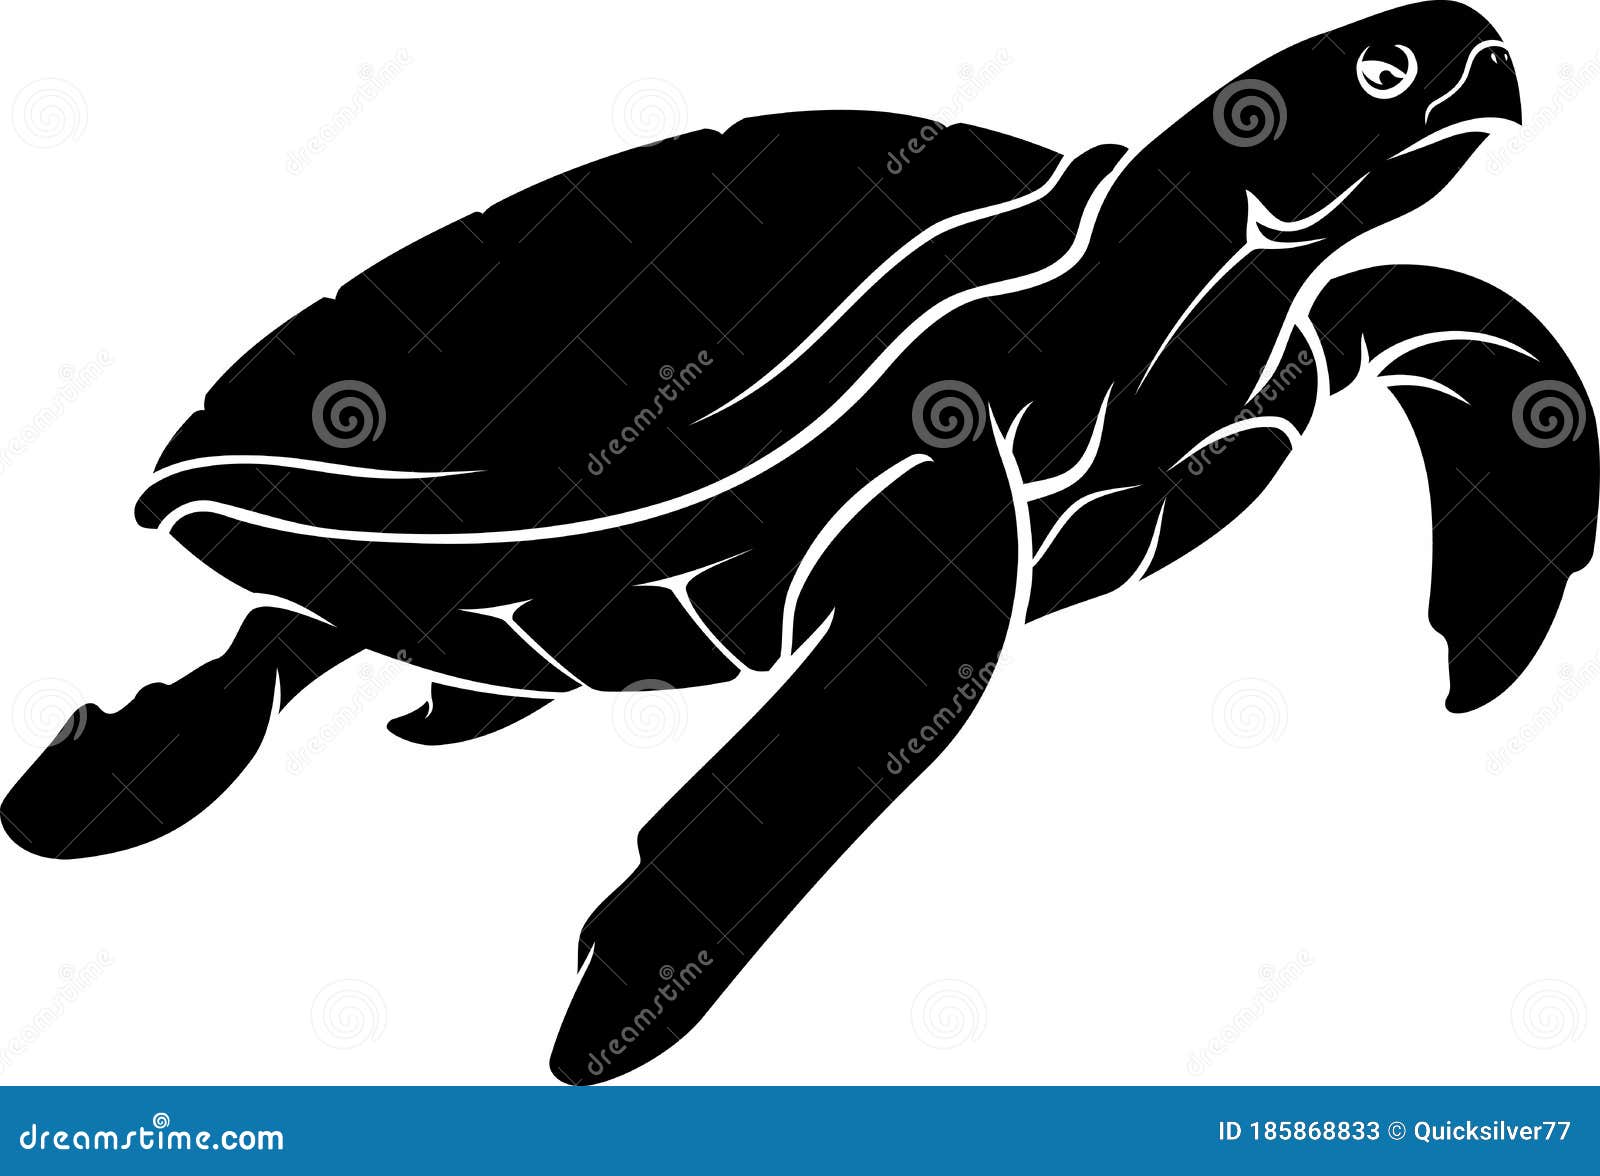 Sea Turtle Silhouette Vector Images Pictures Sea Turtle Silhouette ...